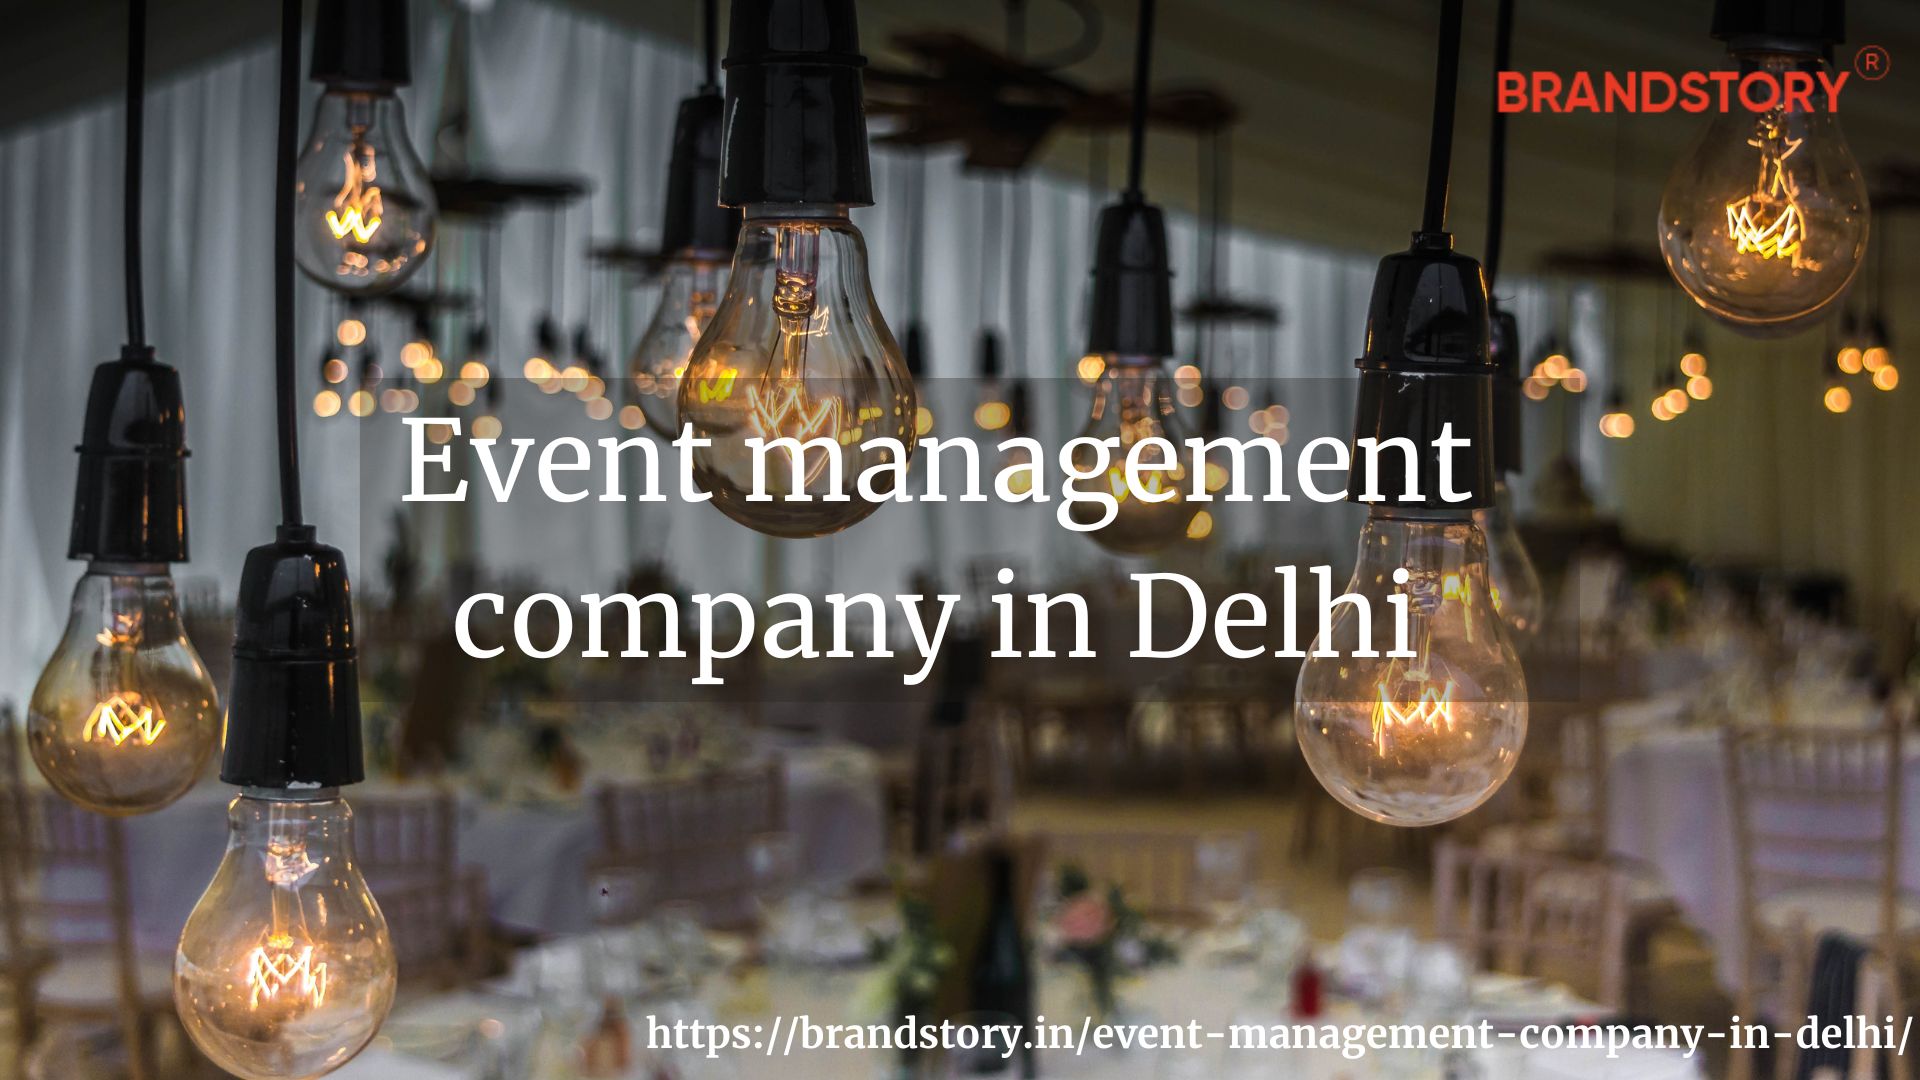 Event management company in Delhi-456911a5